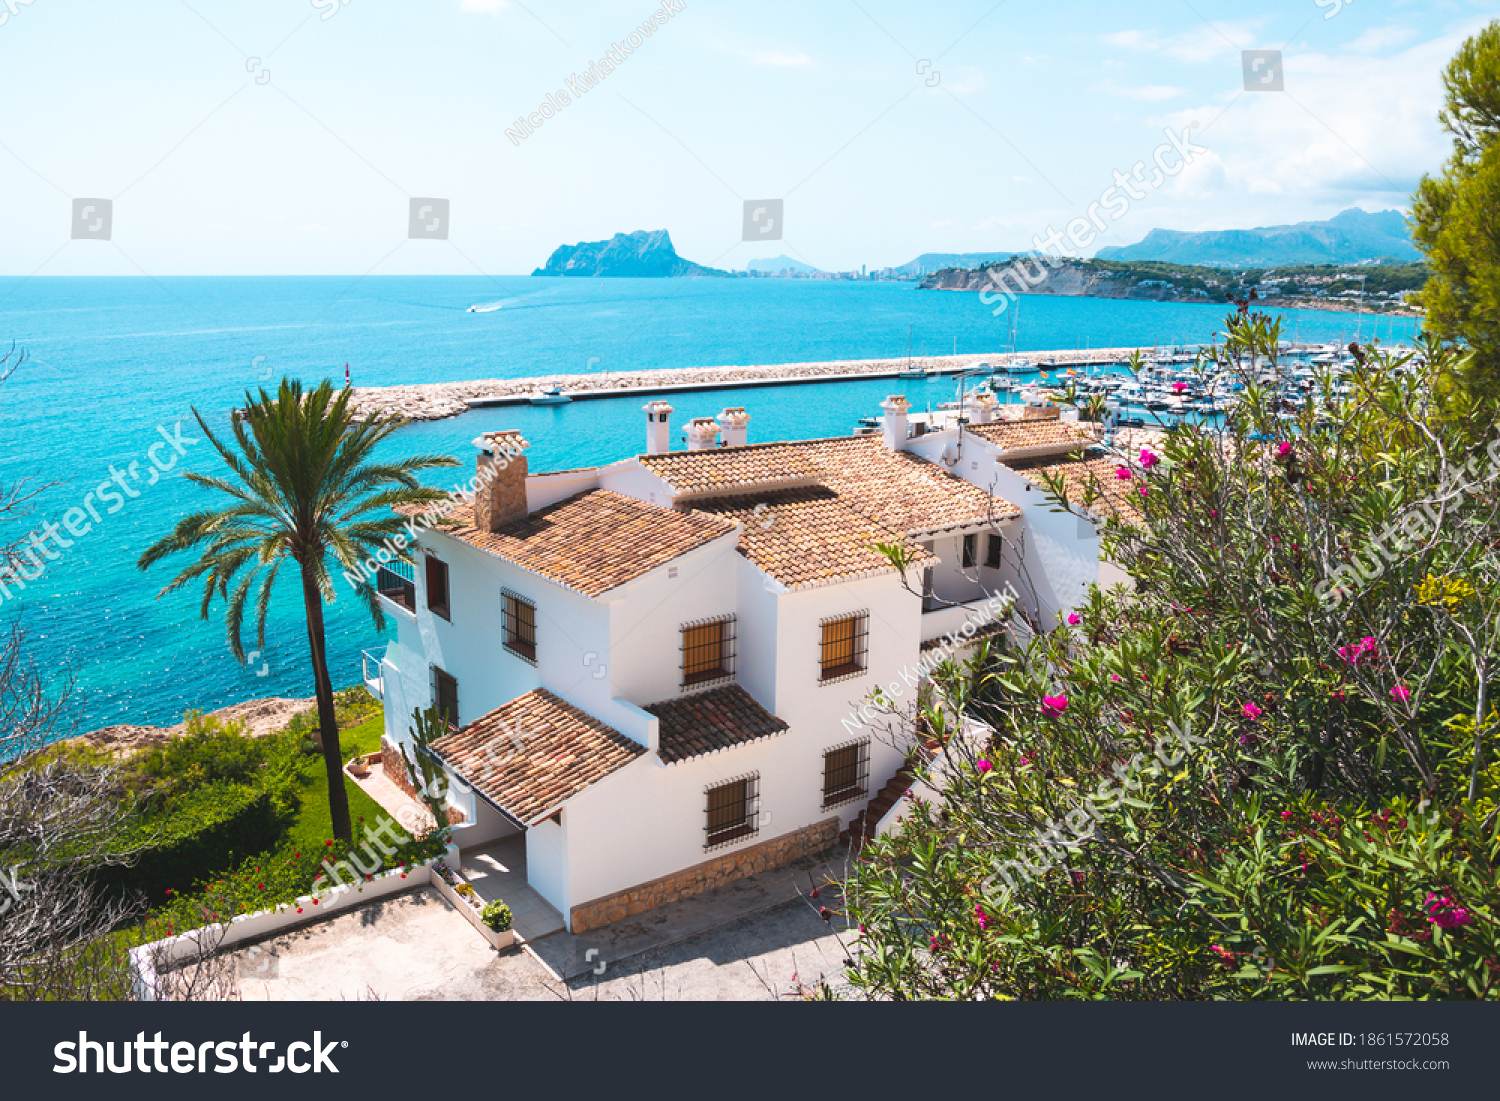 Traditional white houses with unspoiled idyllic view of marina, coastline and Mediterranean Sea in Moraira, Costa Blanca, Spain #1861572058